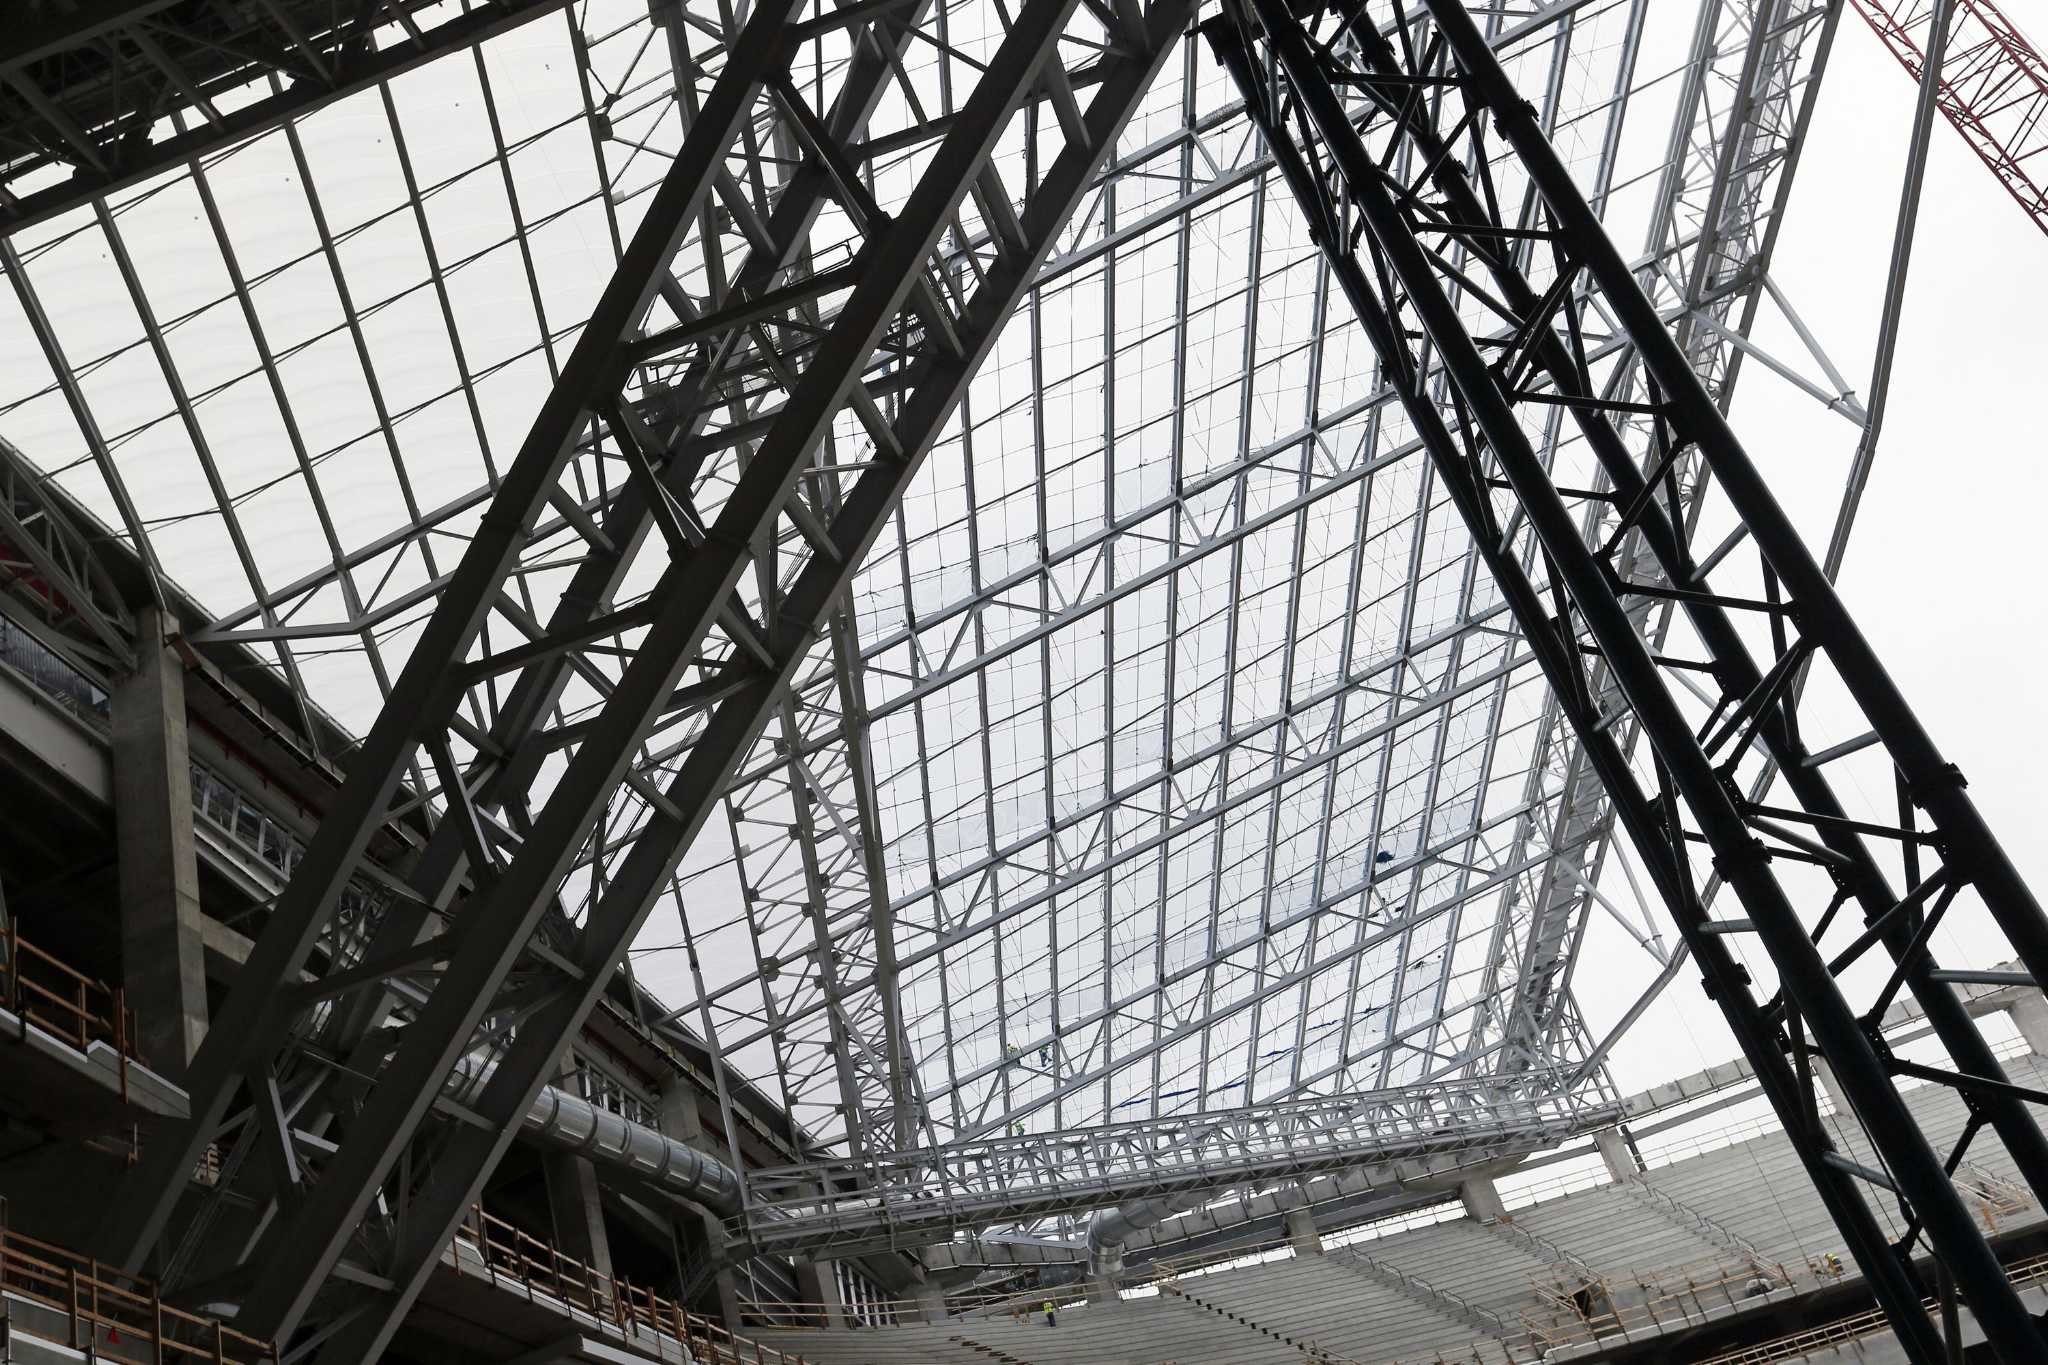 ETFE is defining new stadium construction, lowering costs and opening  options